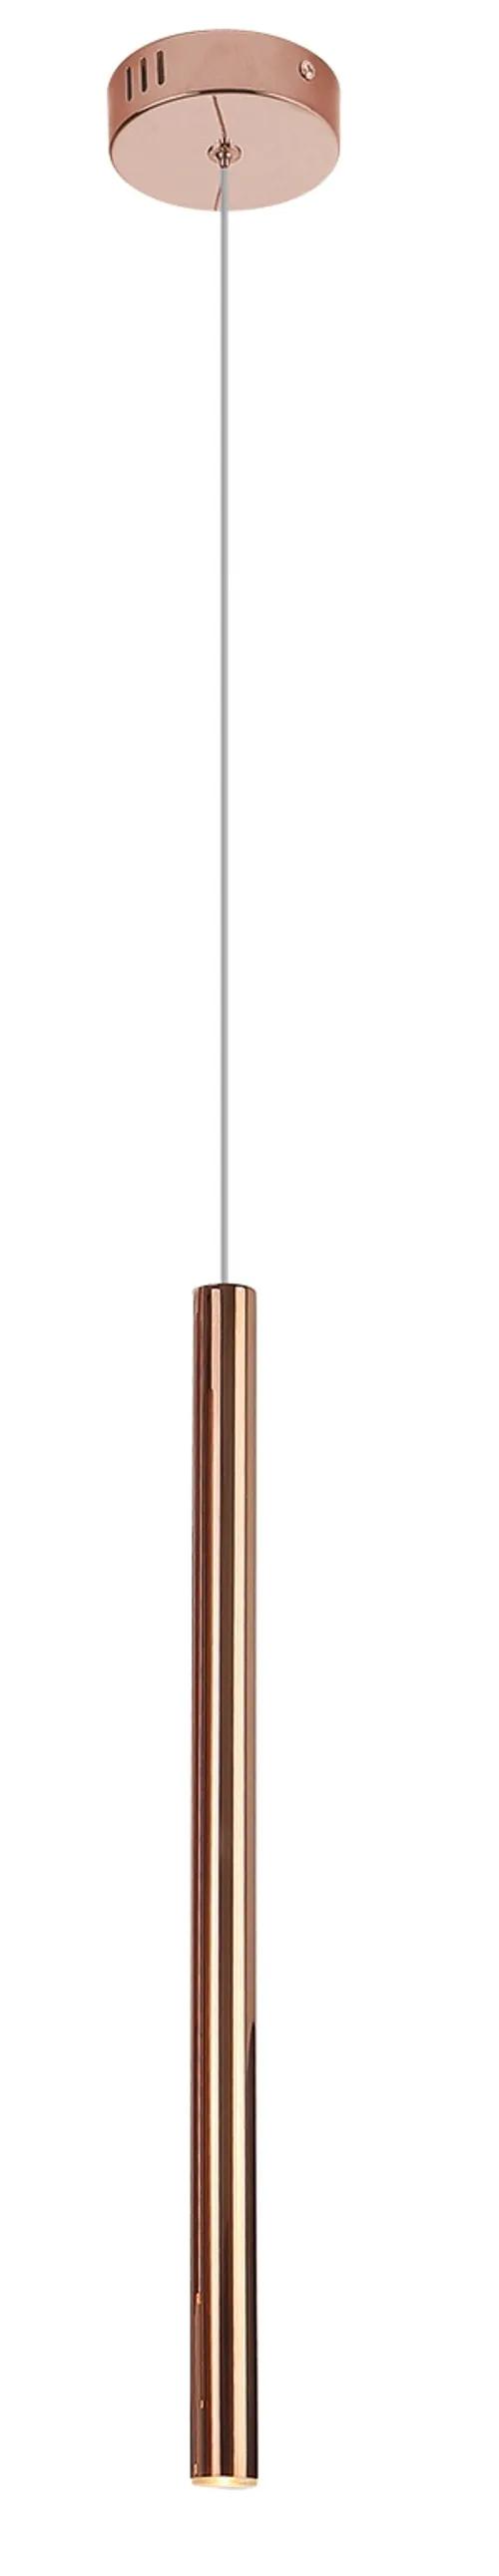 ORGANIC AND COPPER LAMP